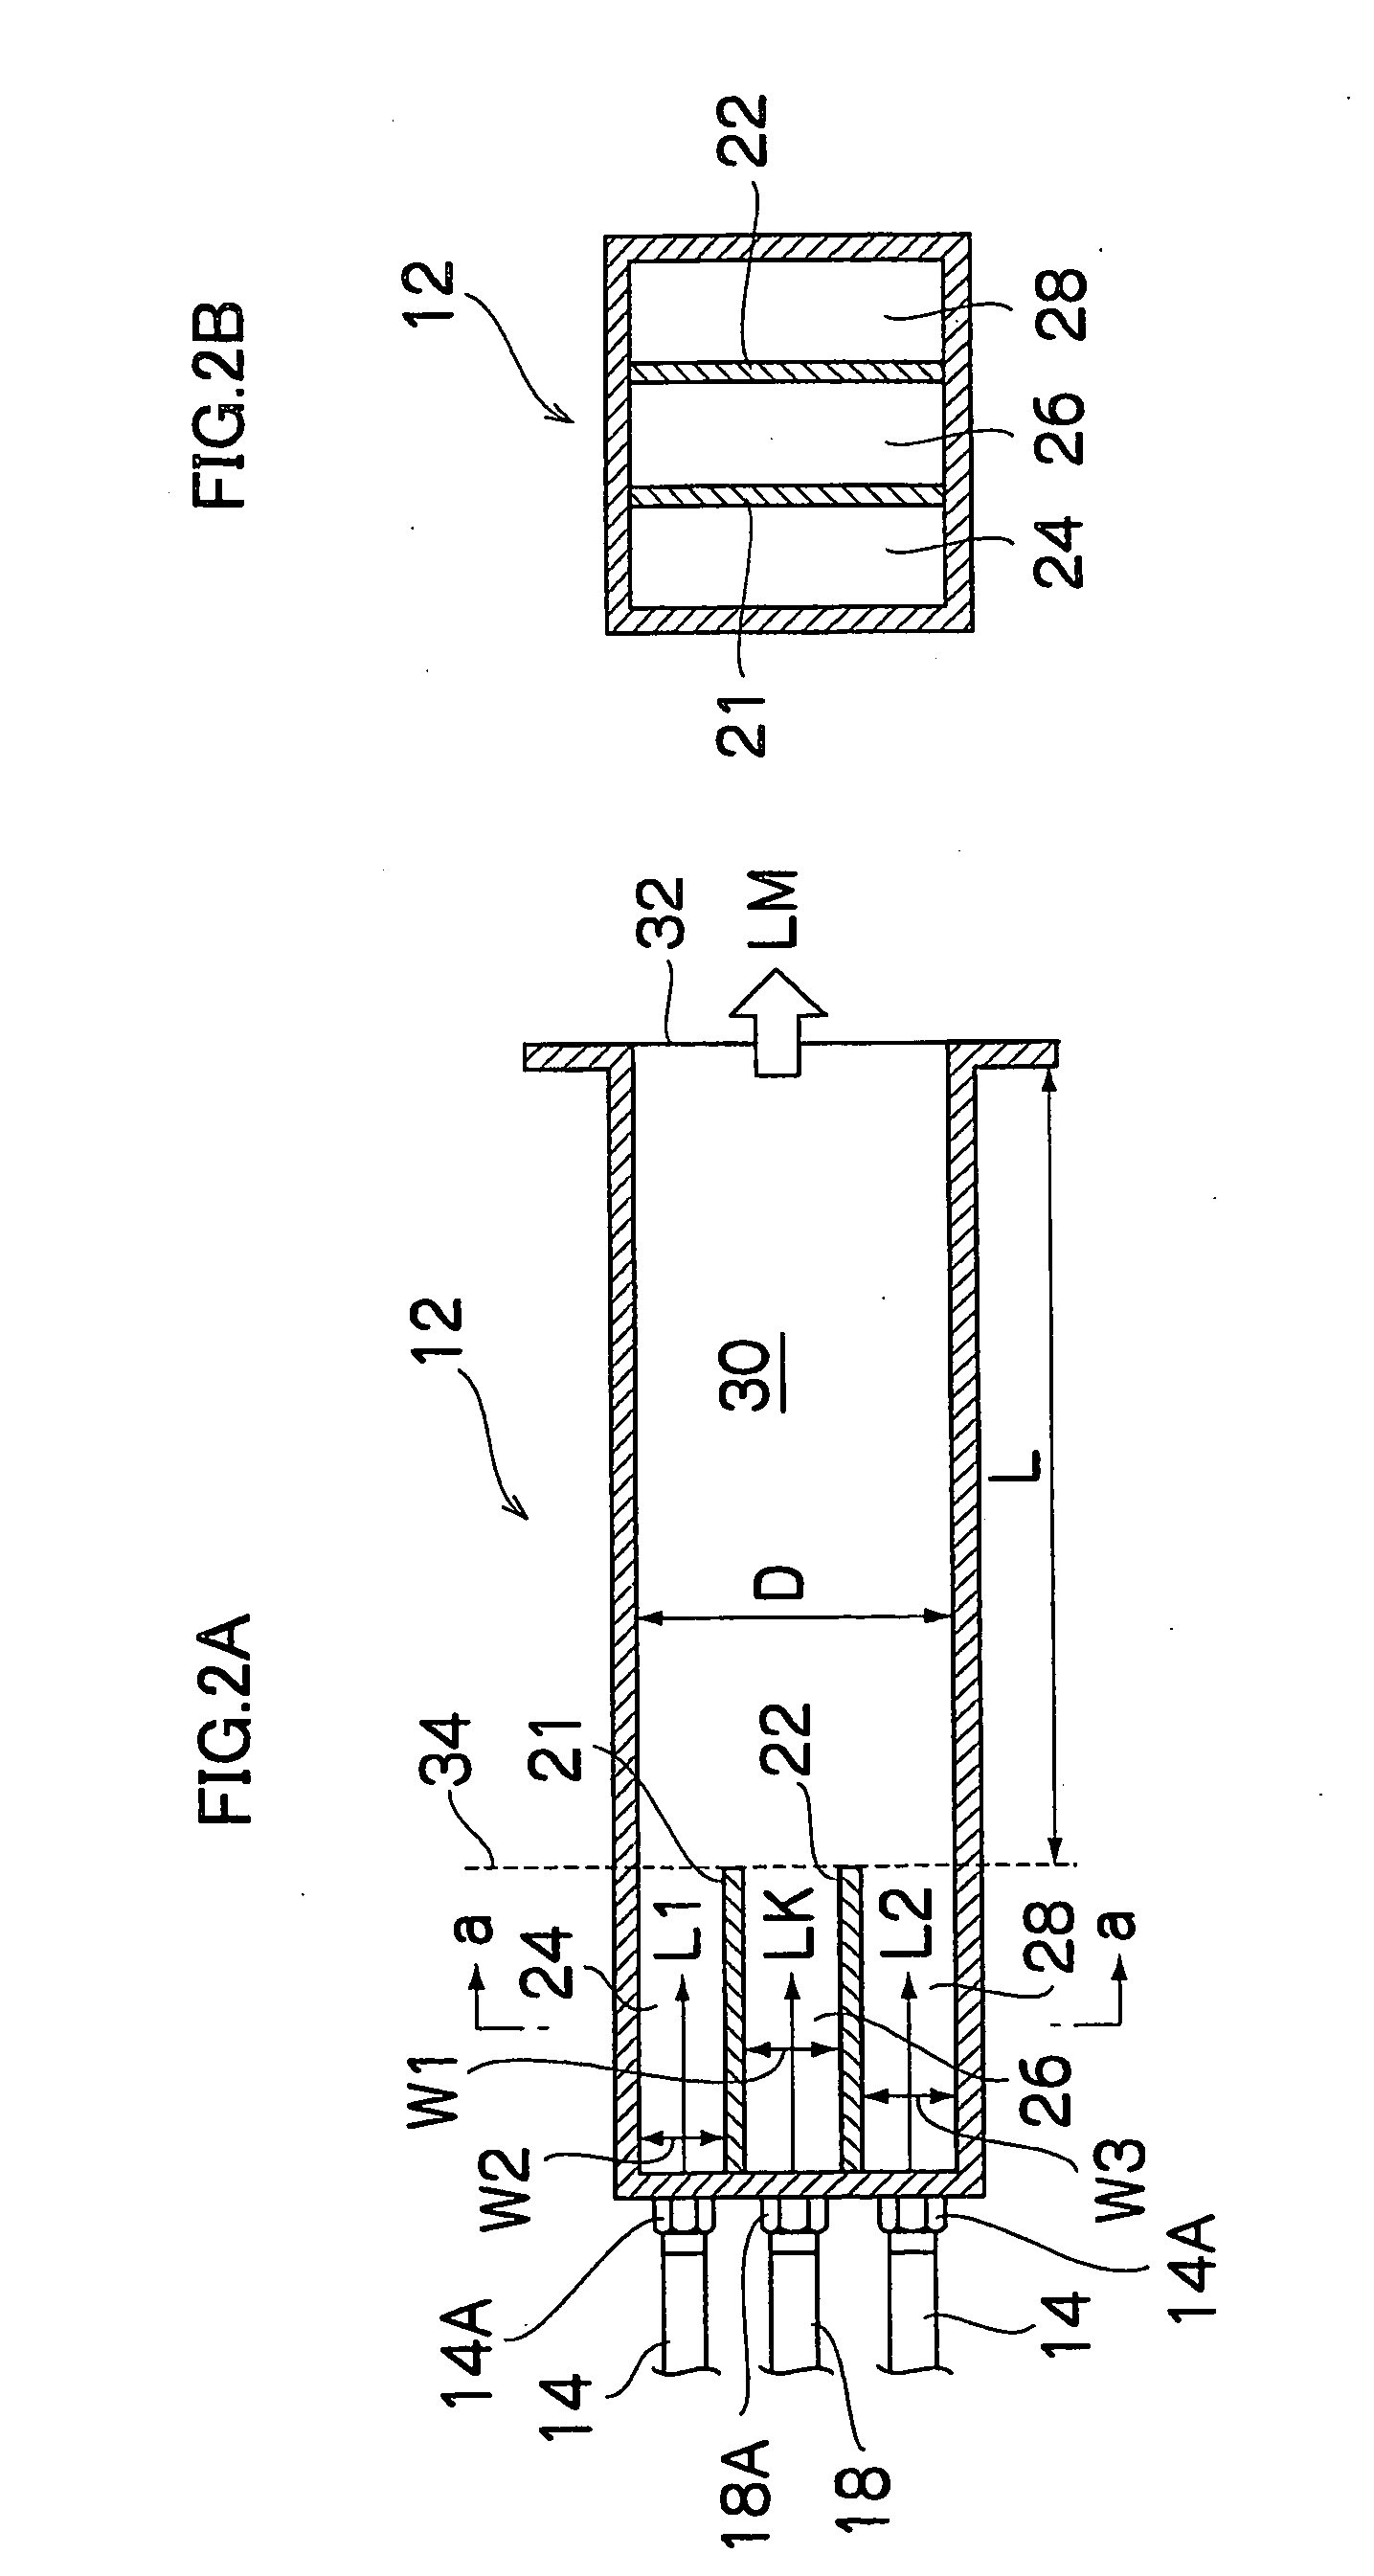 Method for producing chemicals